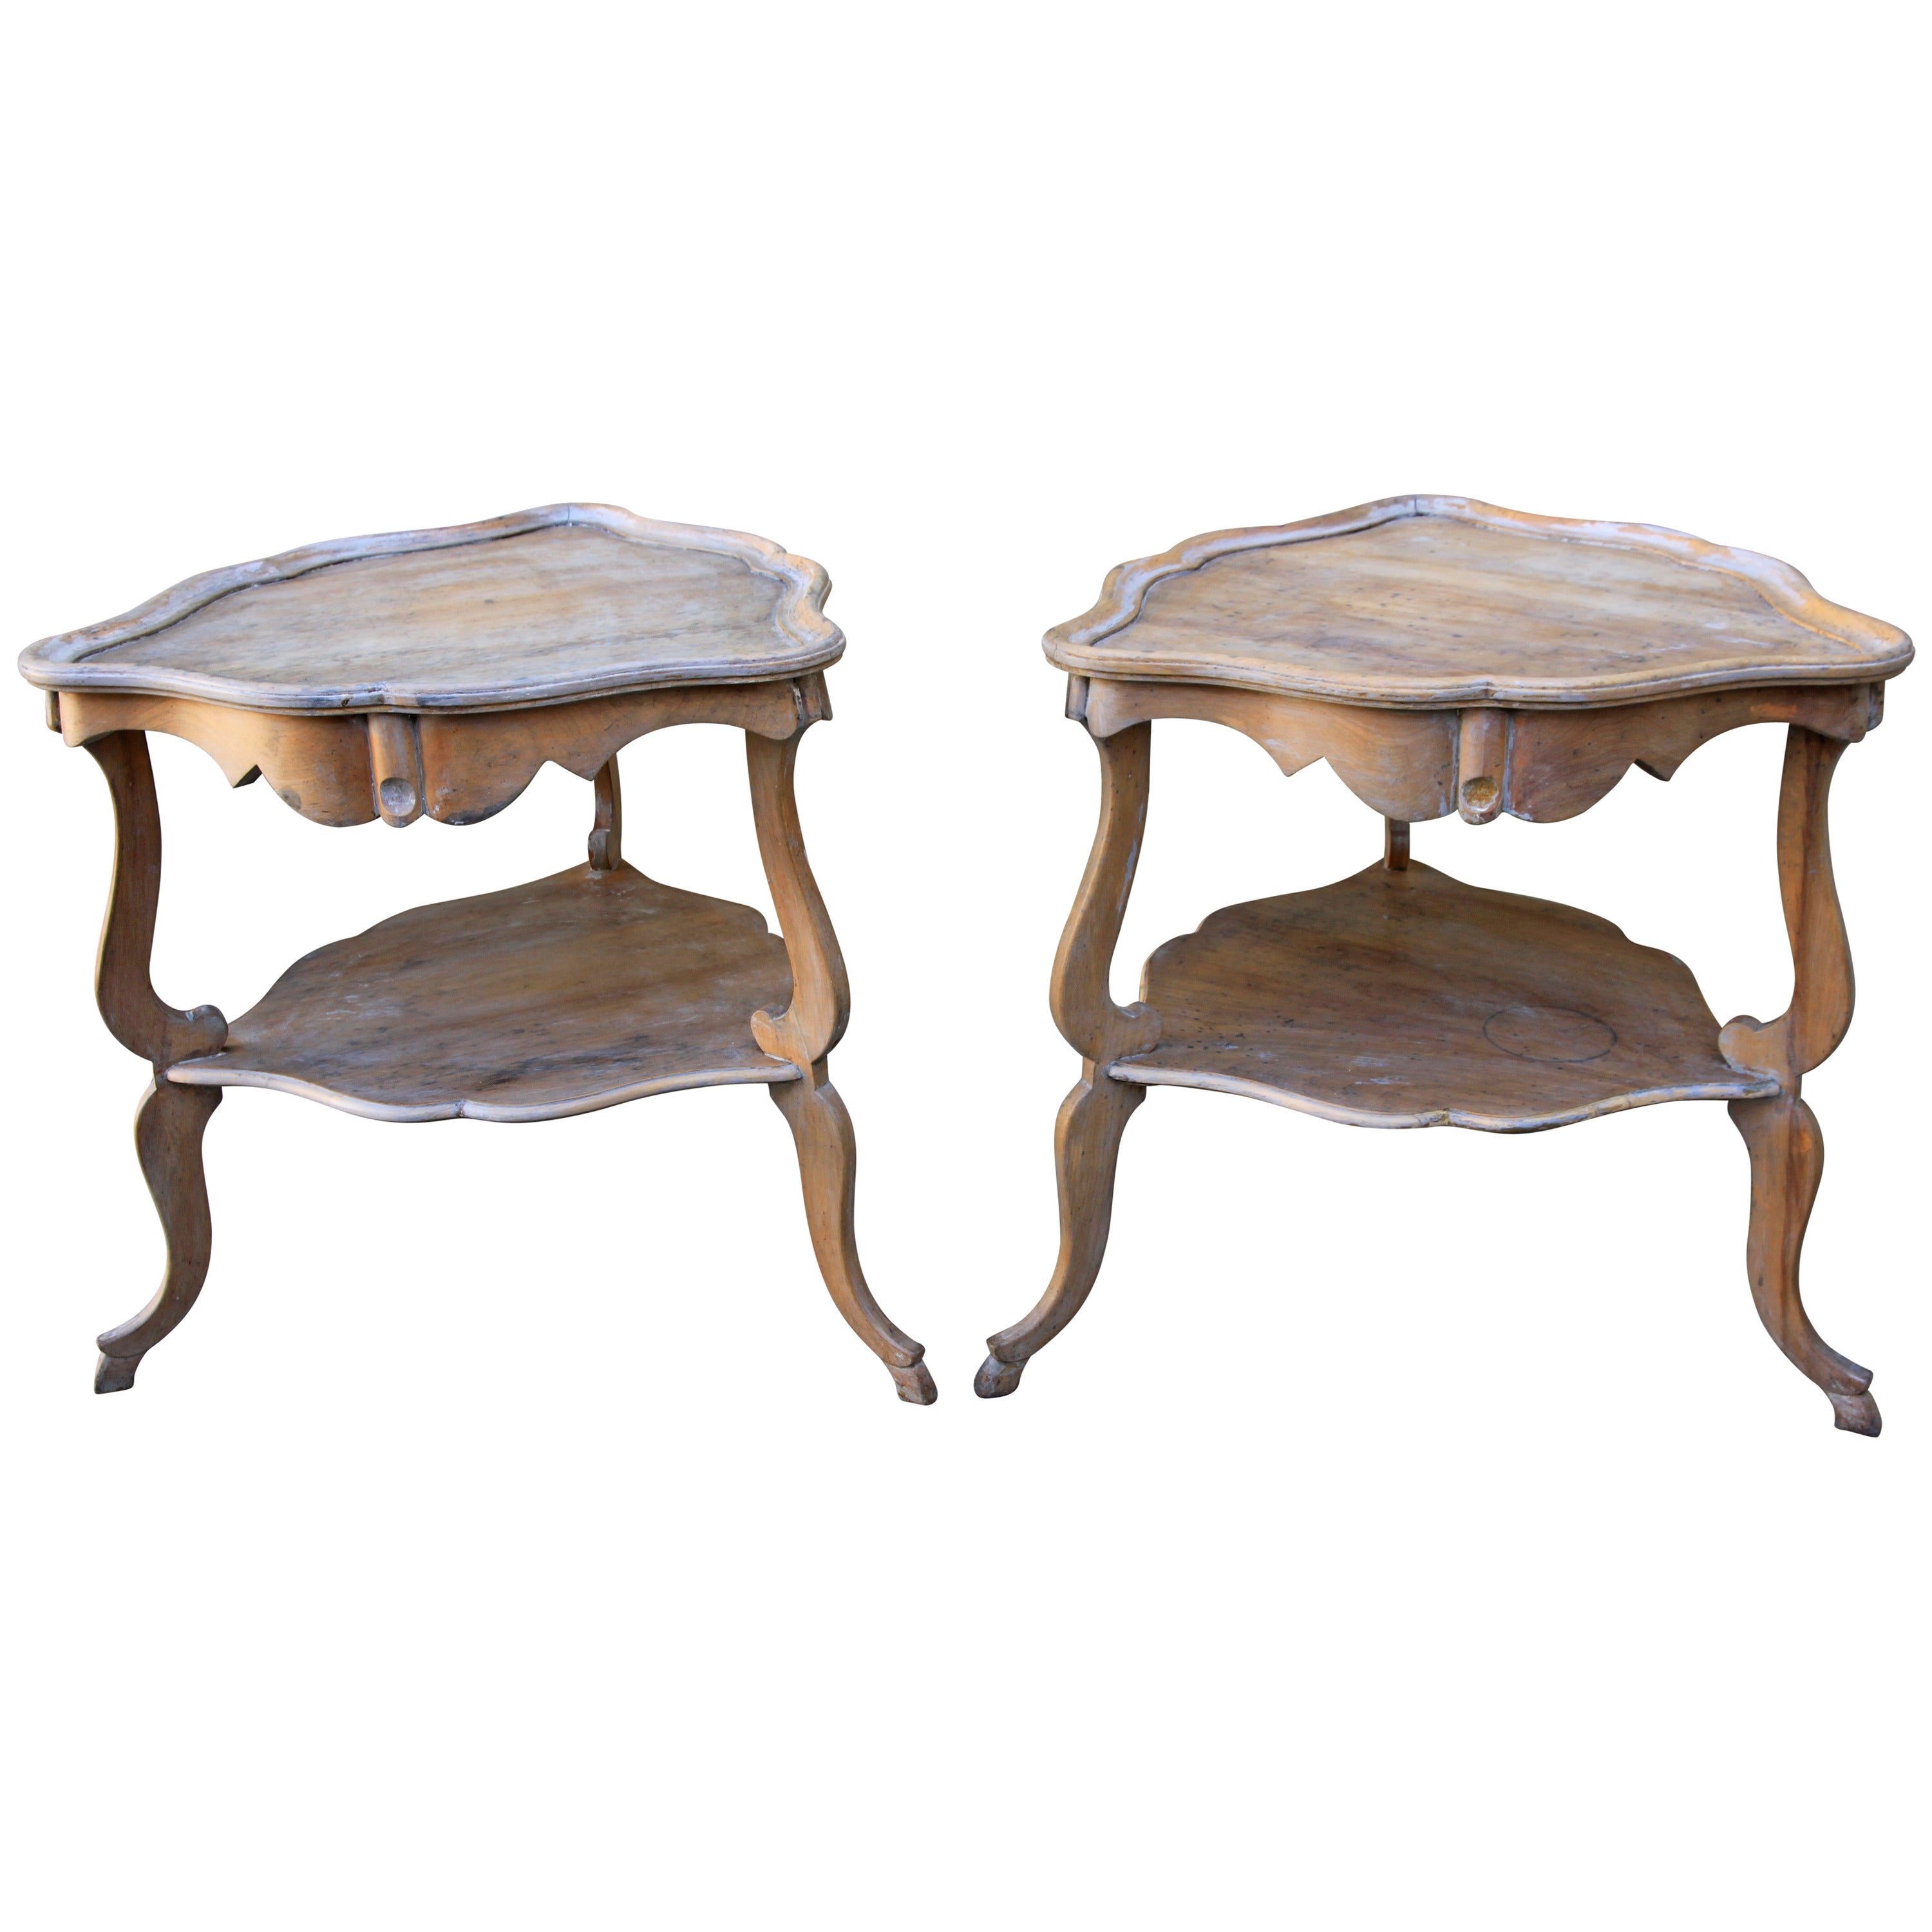 Pair of French Louis XV Style Two-Tiered Tables